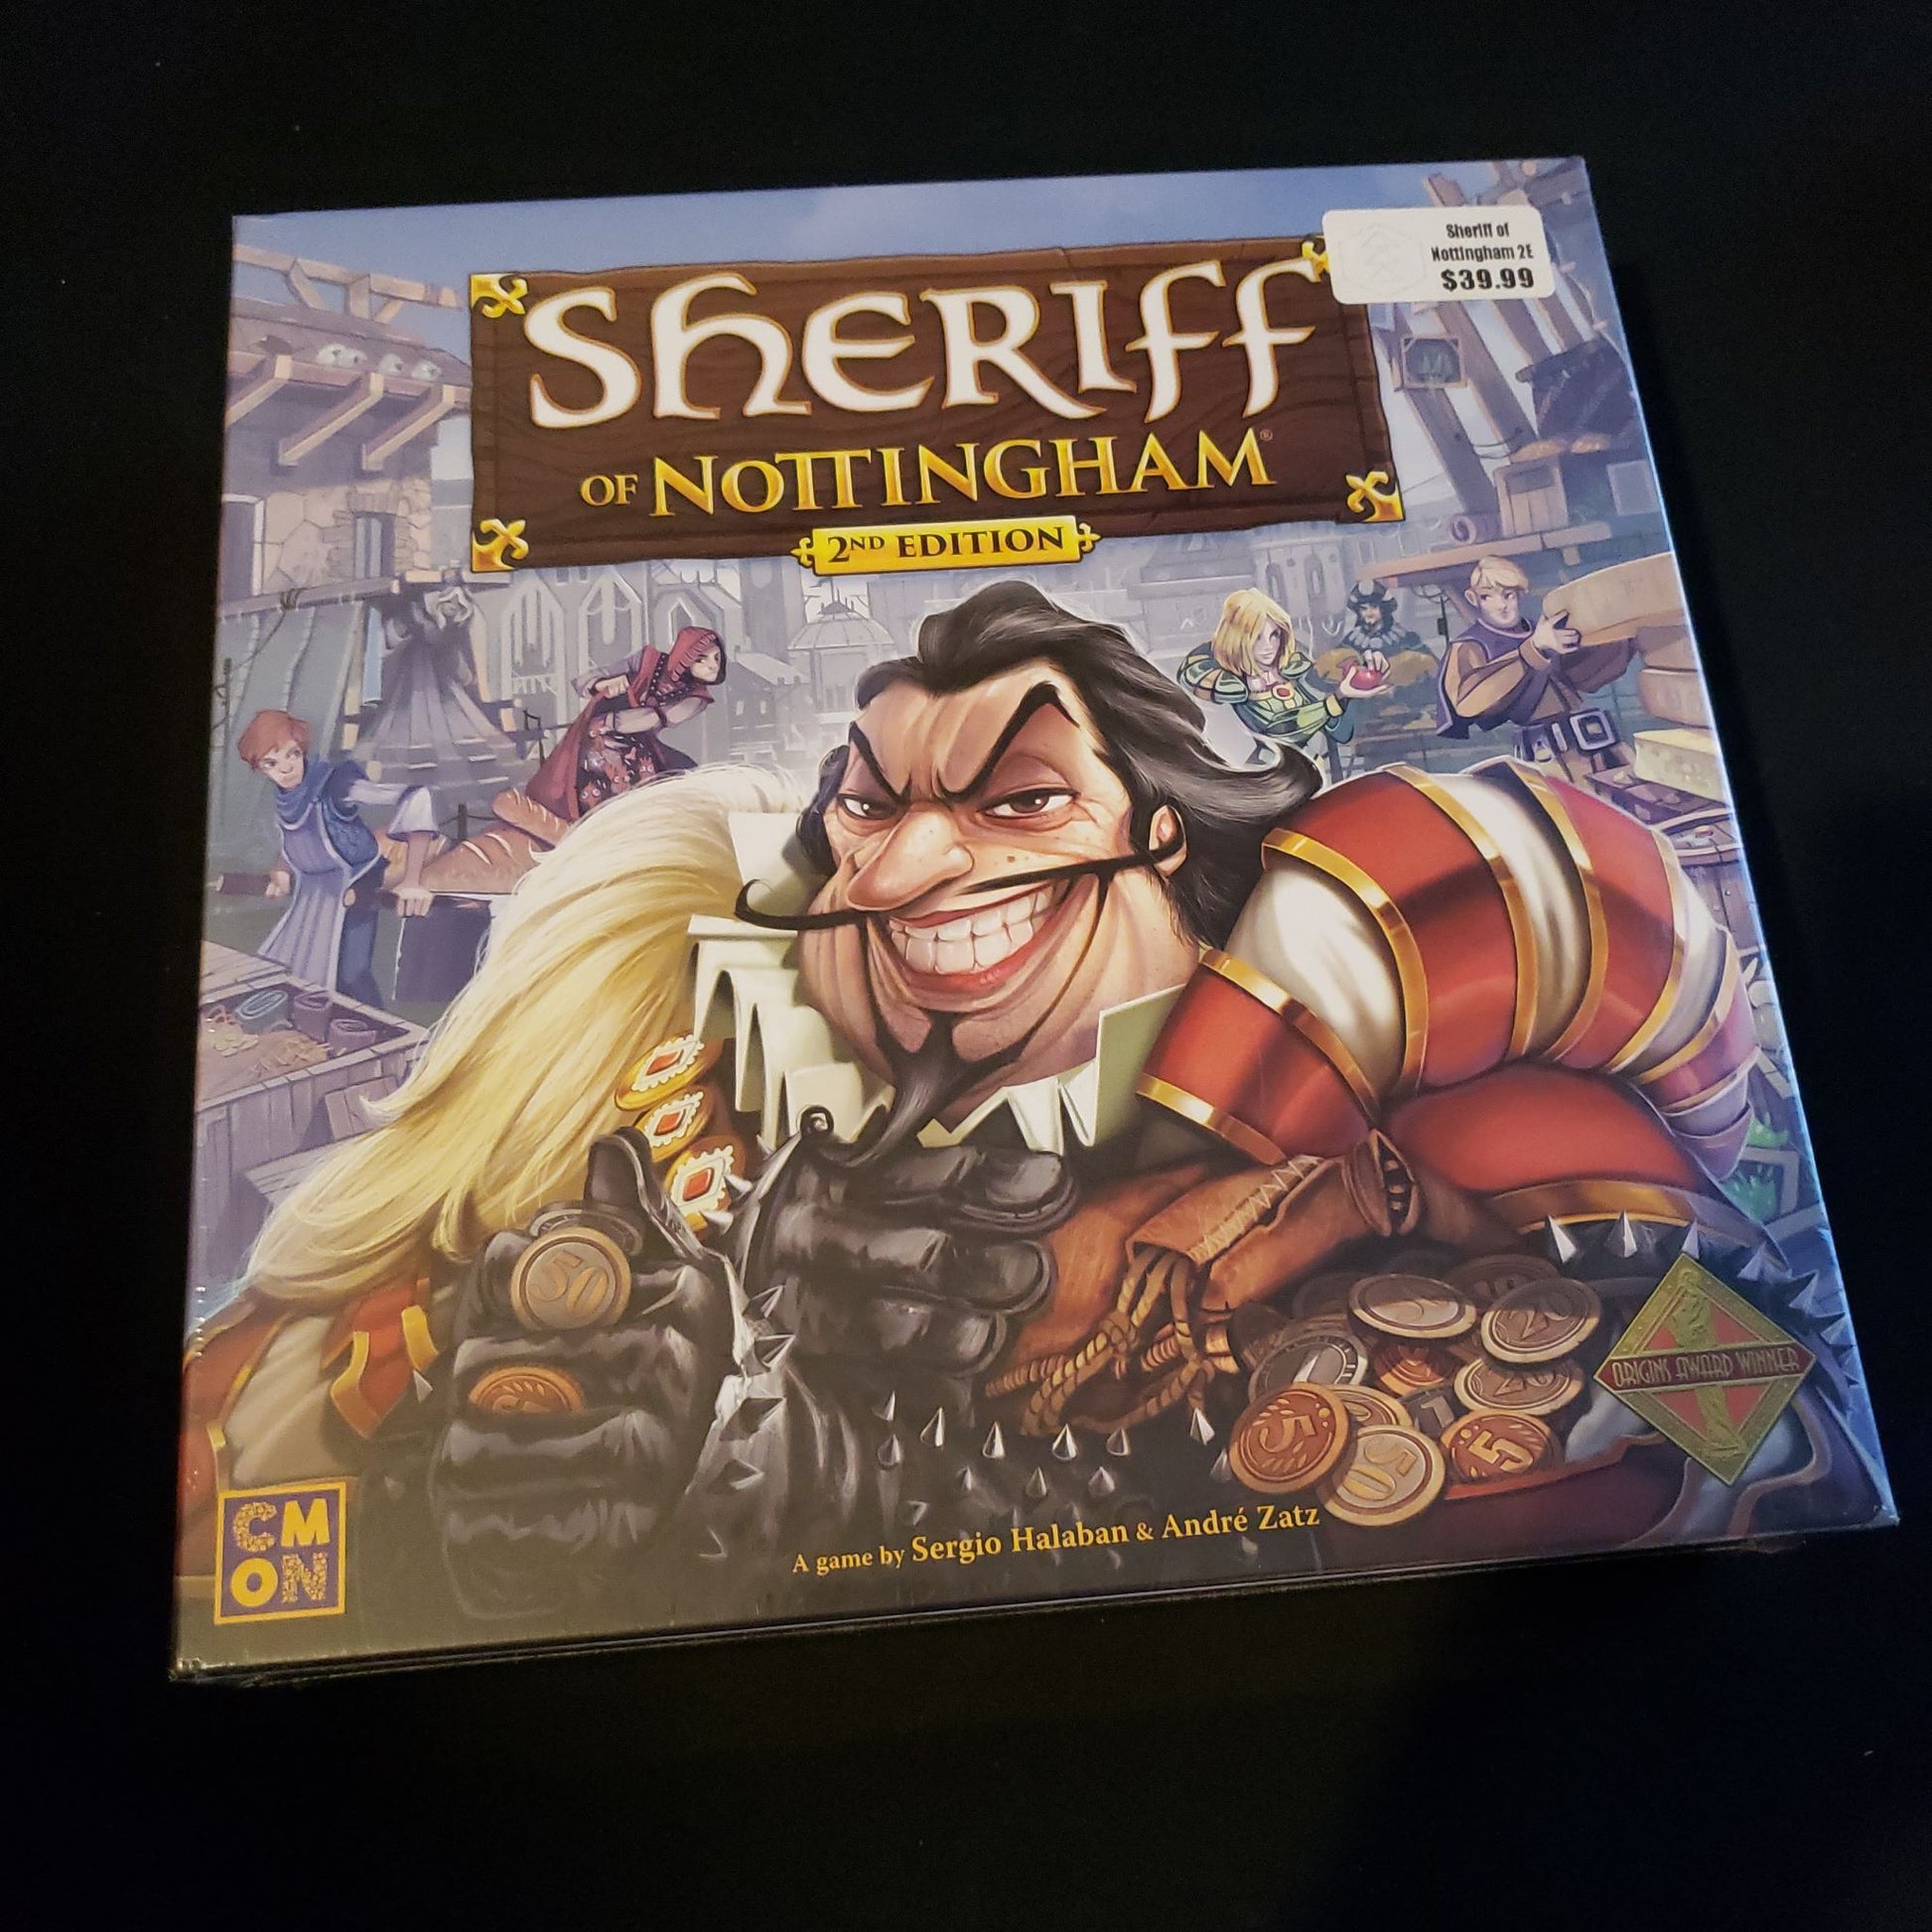 Image shows the front cover of the box of the Sheriff of Nottingham: Second Edition board game